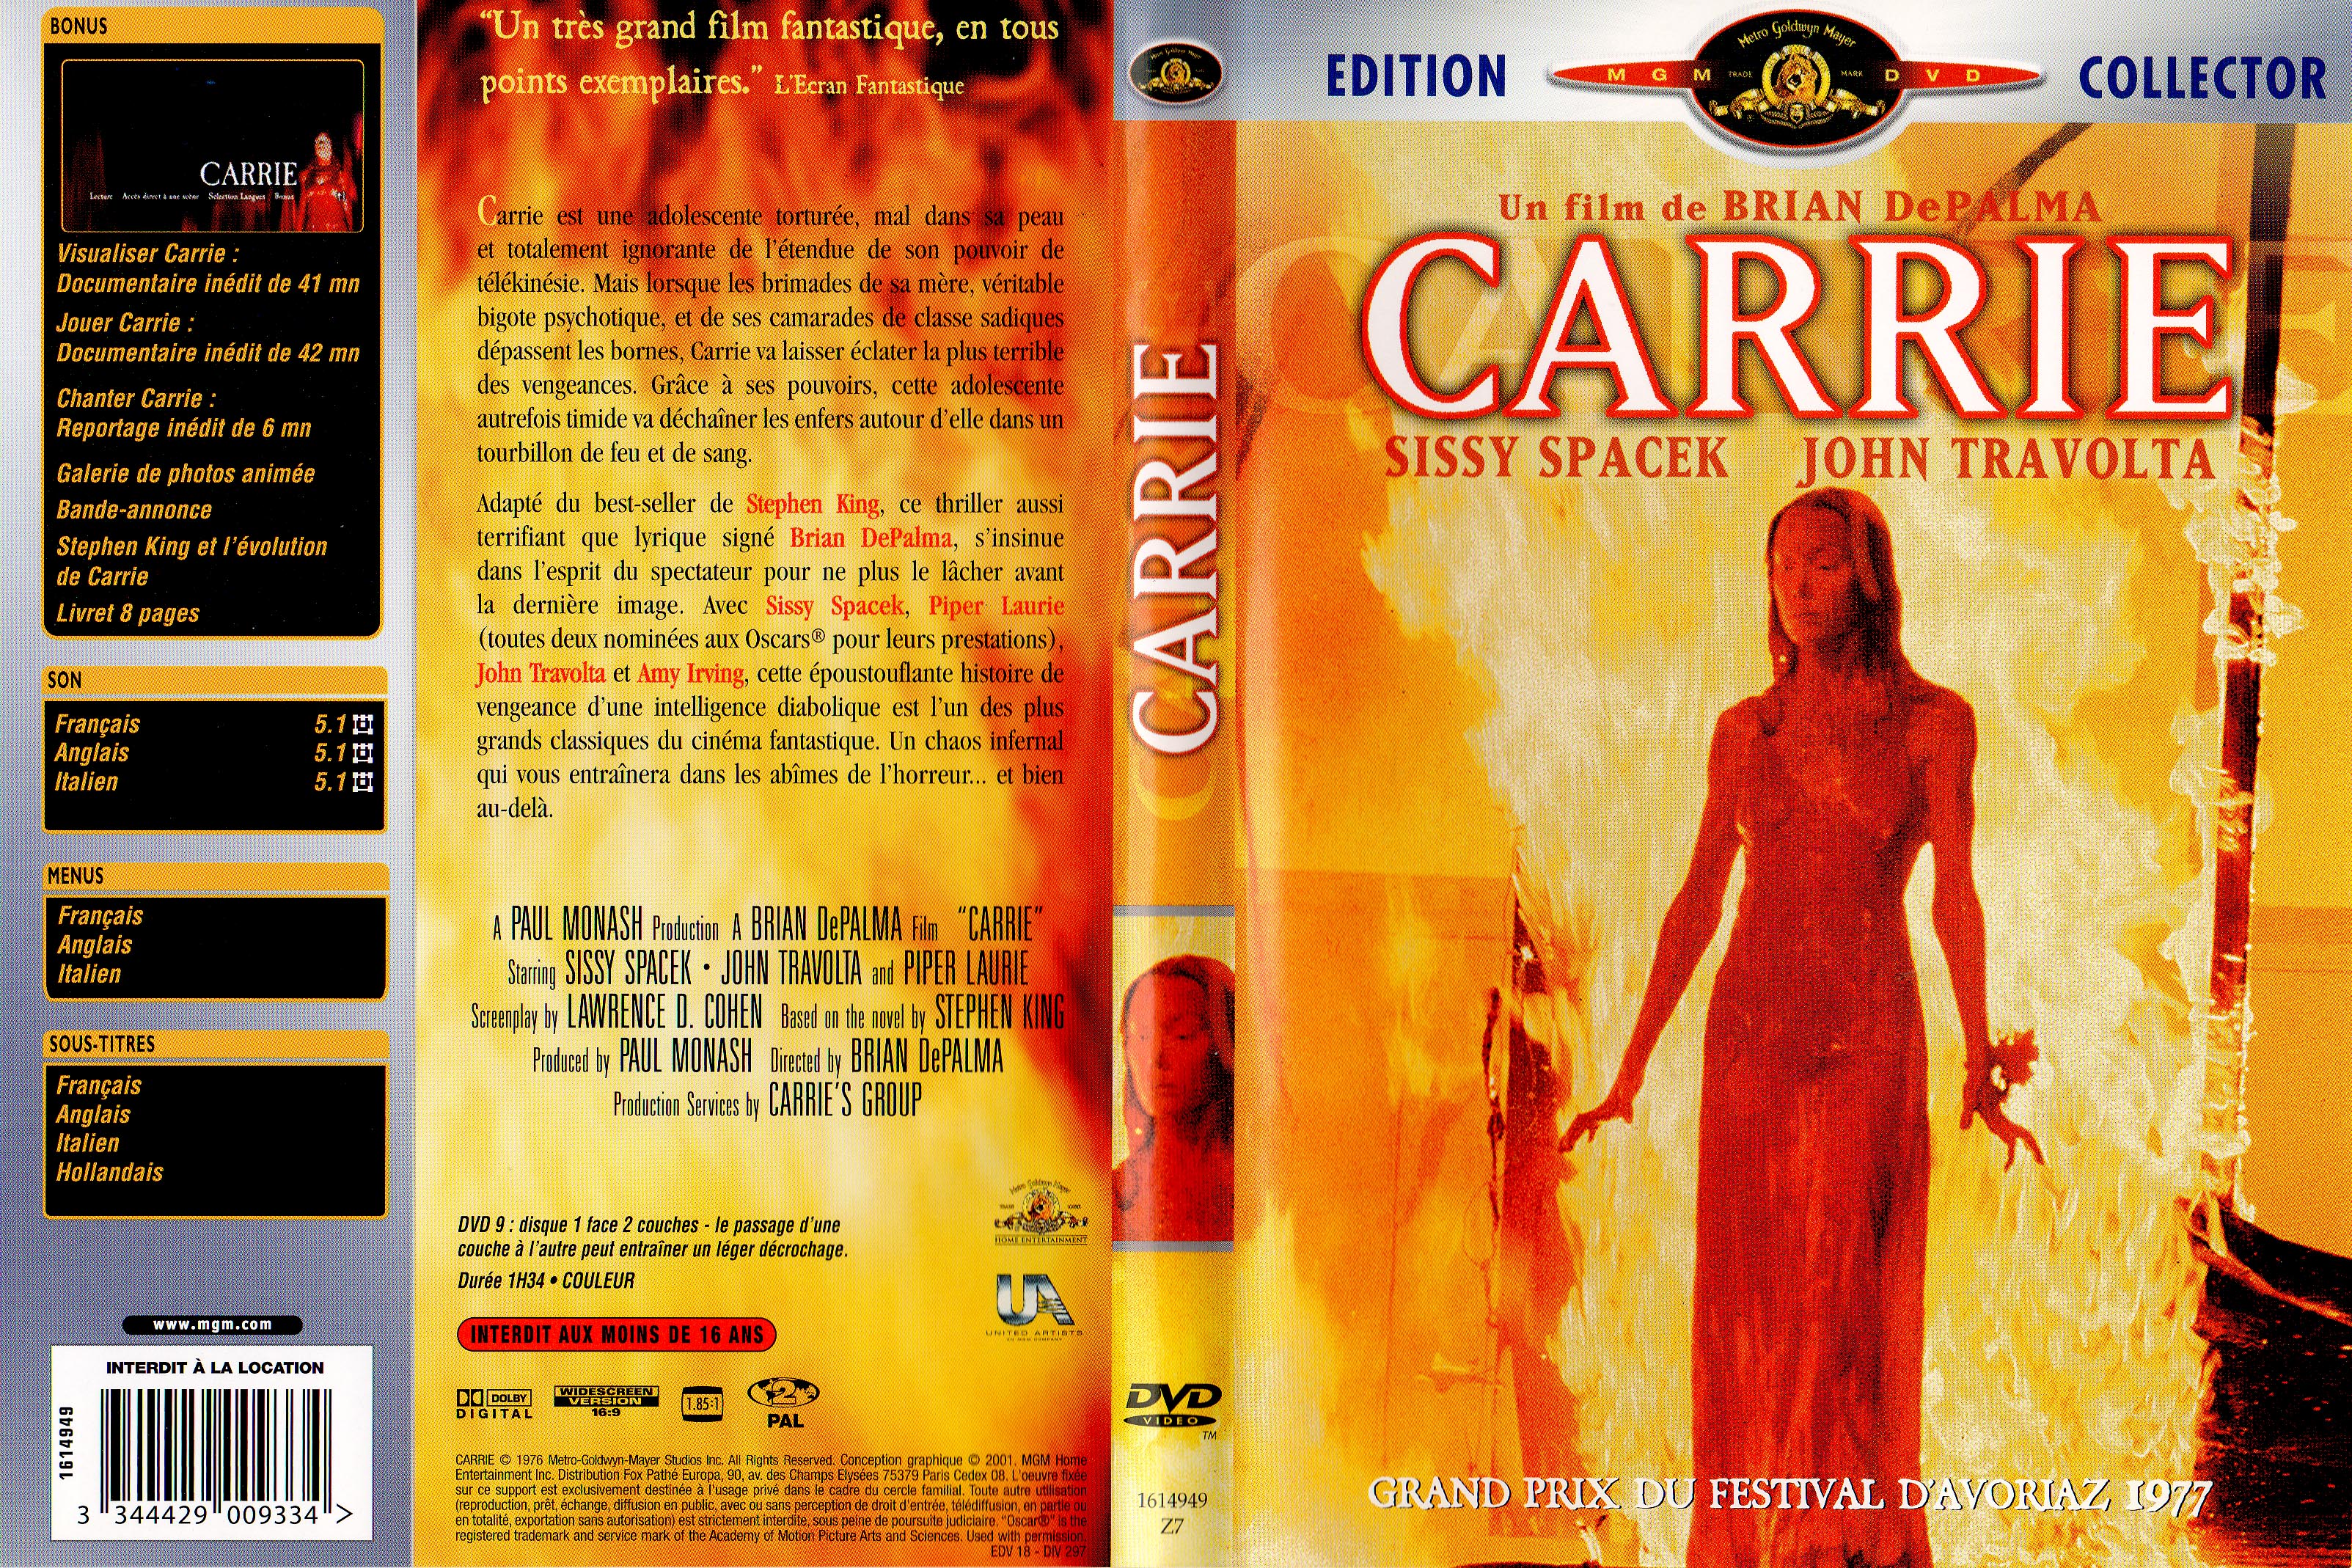 Jaquette DVD Carrie v4